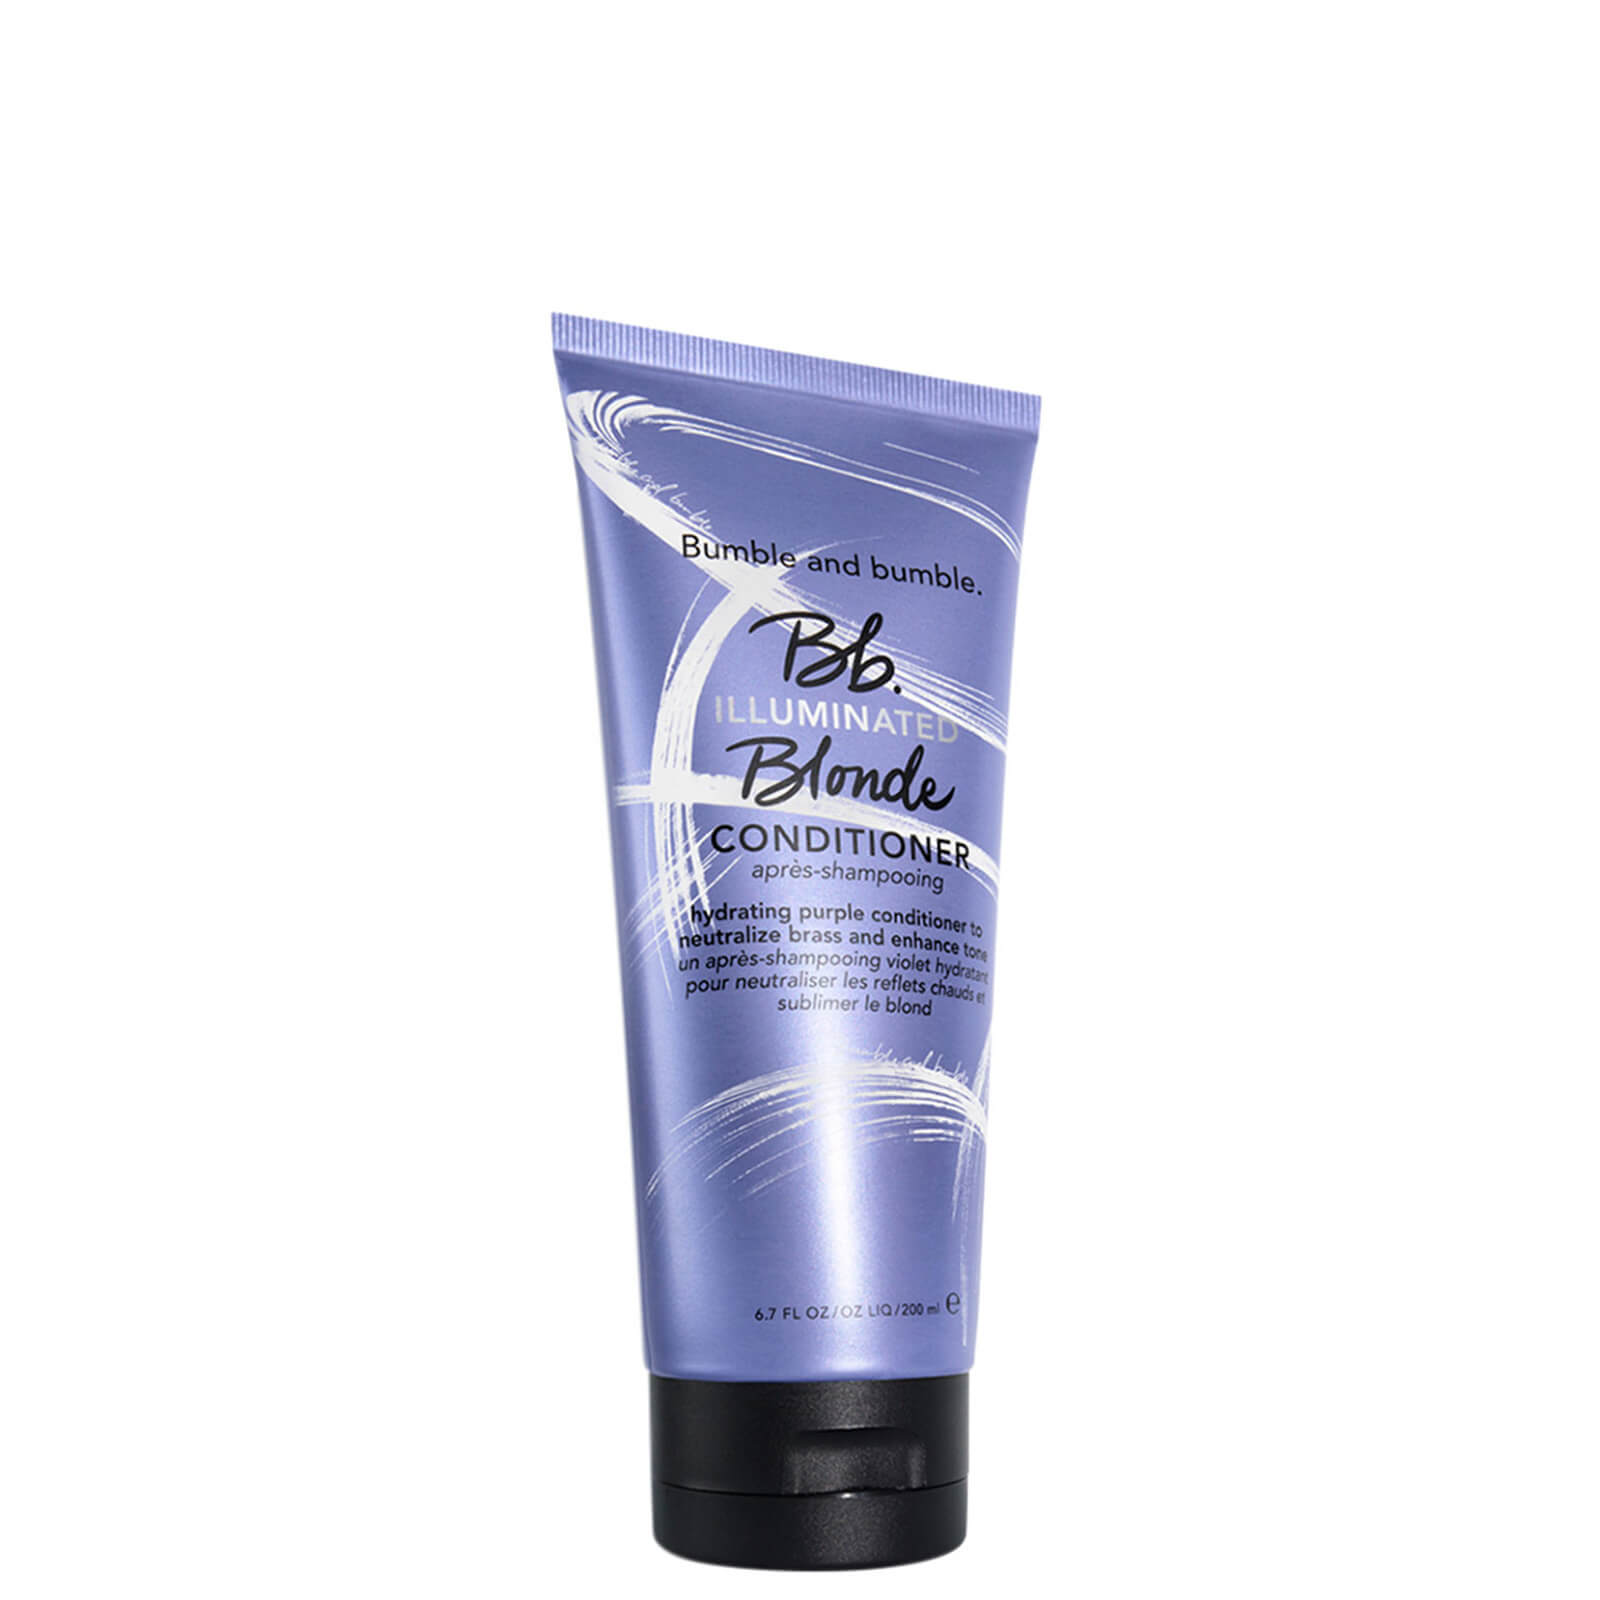 Bumble and bumble Blonde Conditioner (Various Sizes) - 200ml